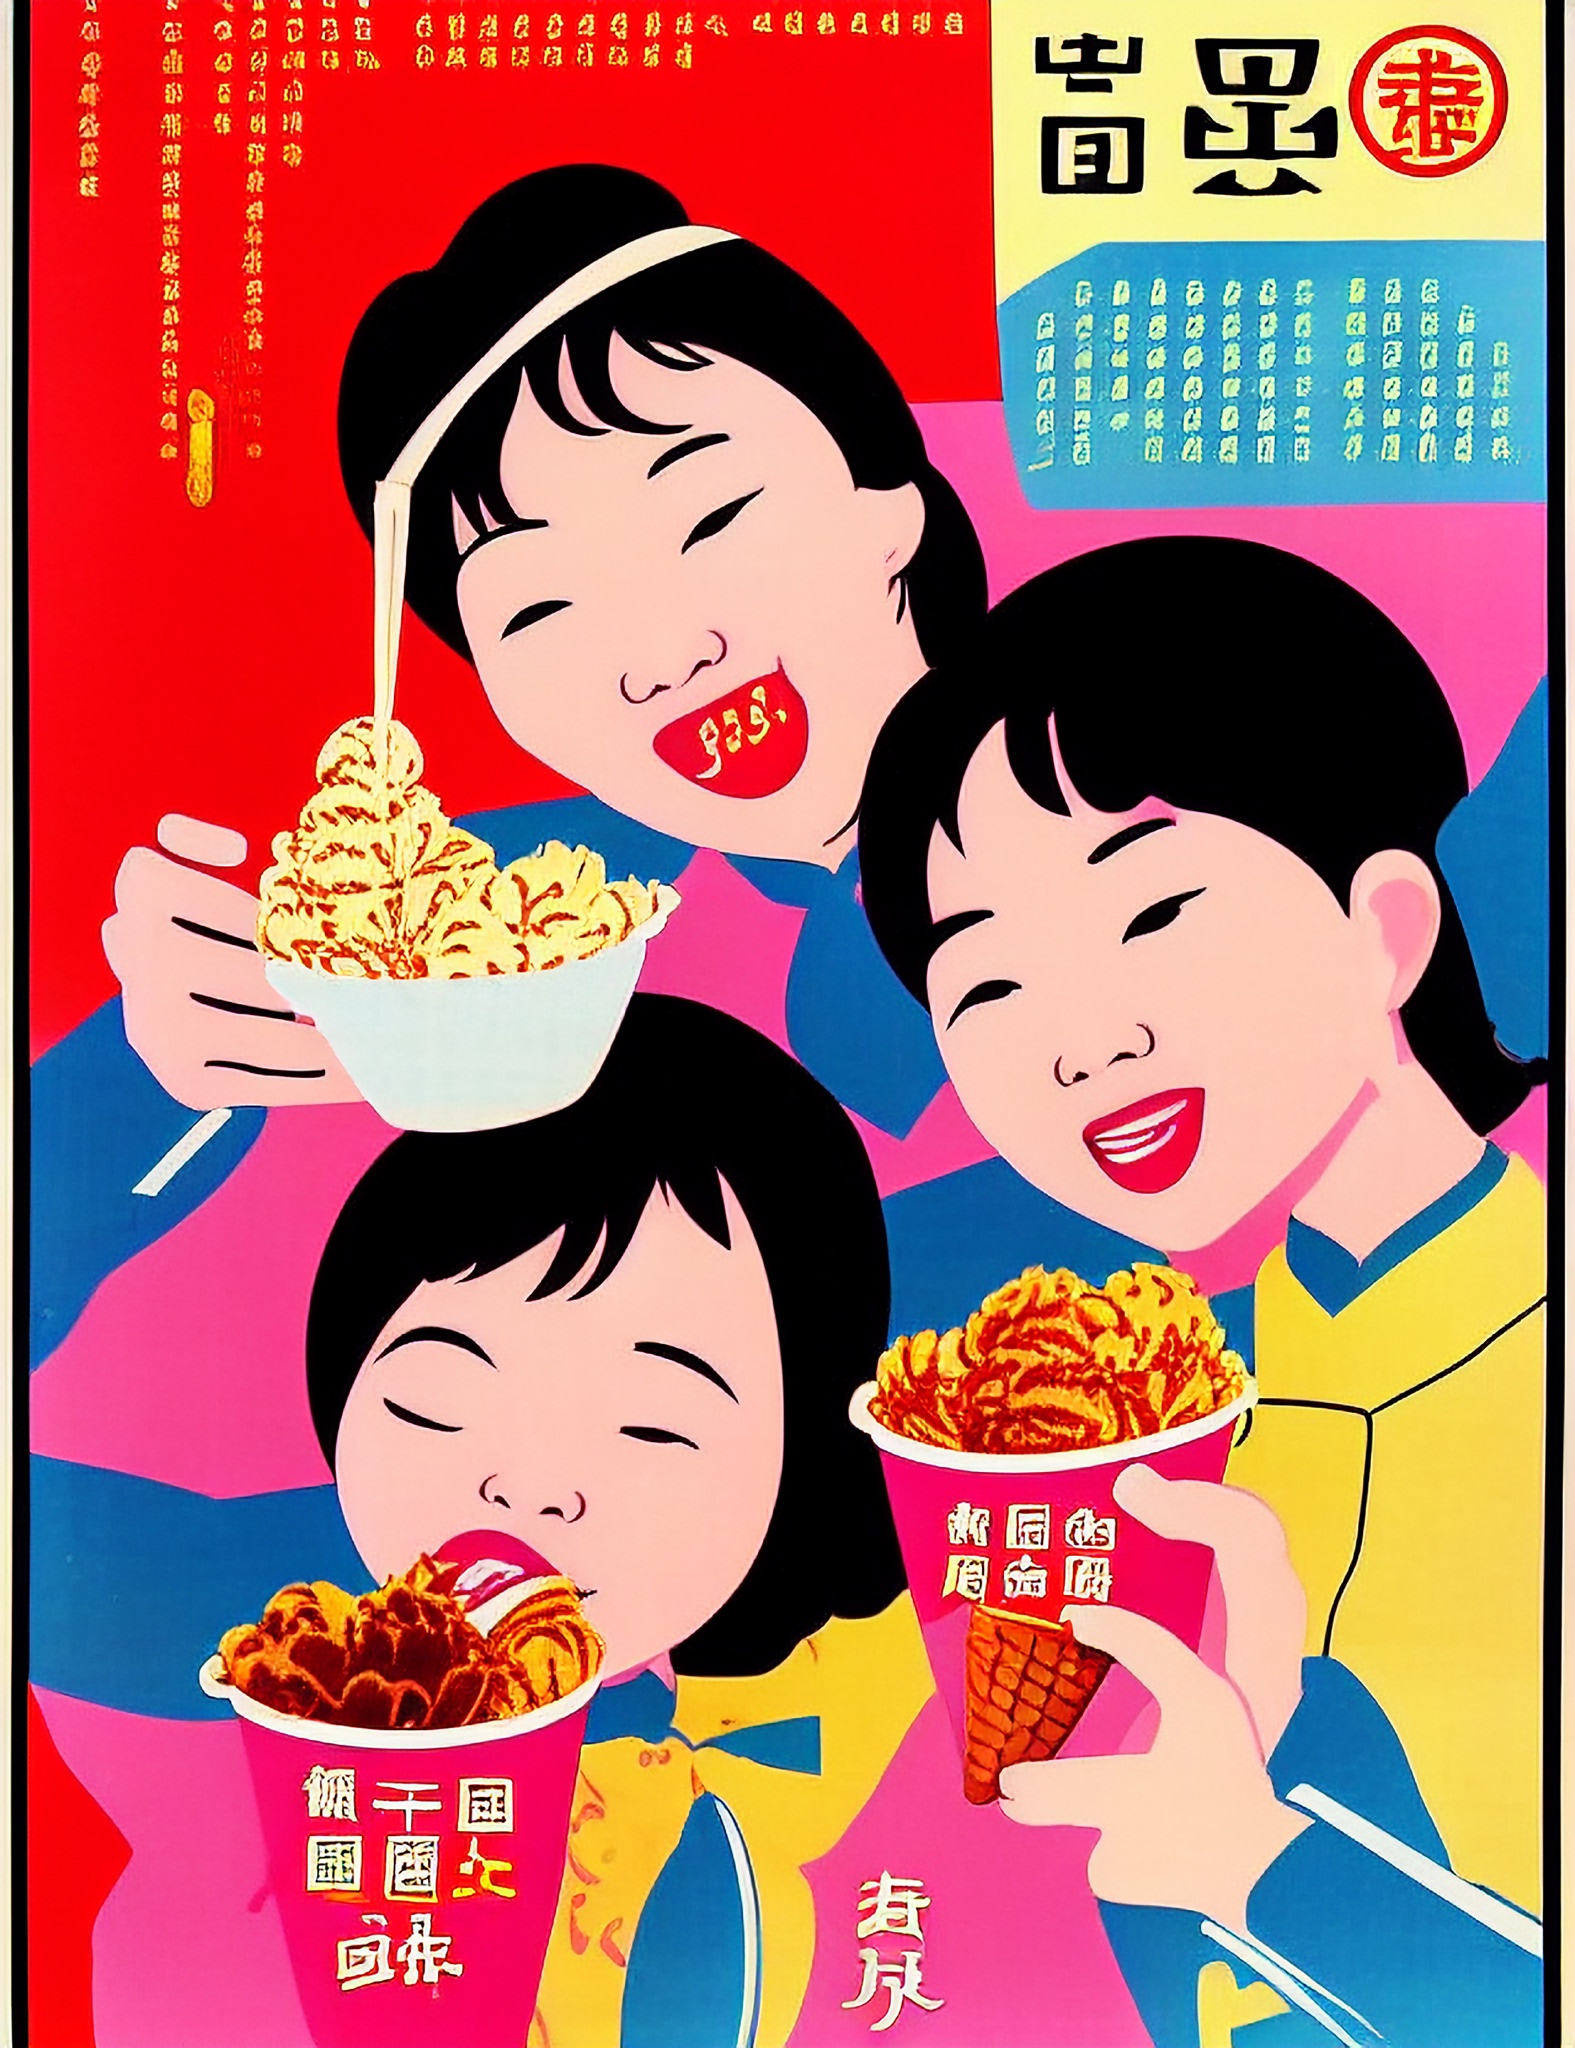 chinese-ice-cream-1980s-style-poster-2